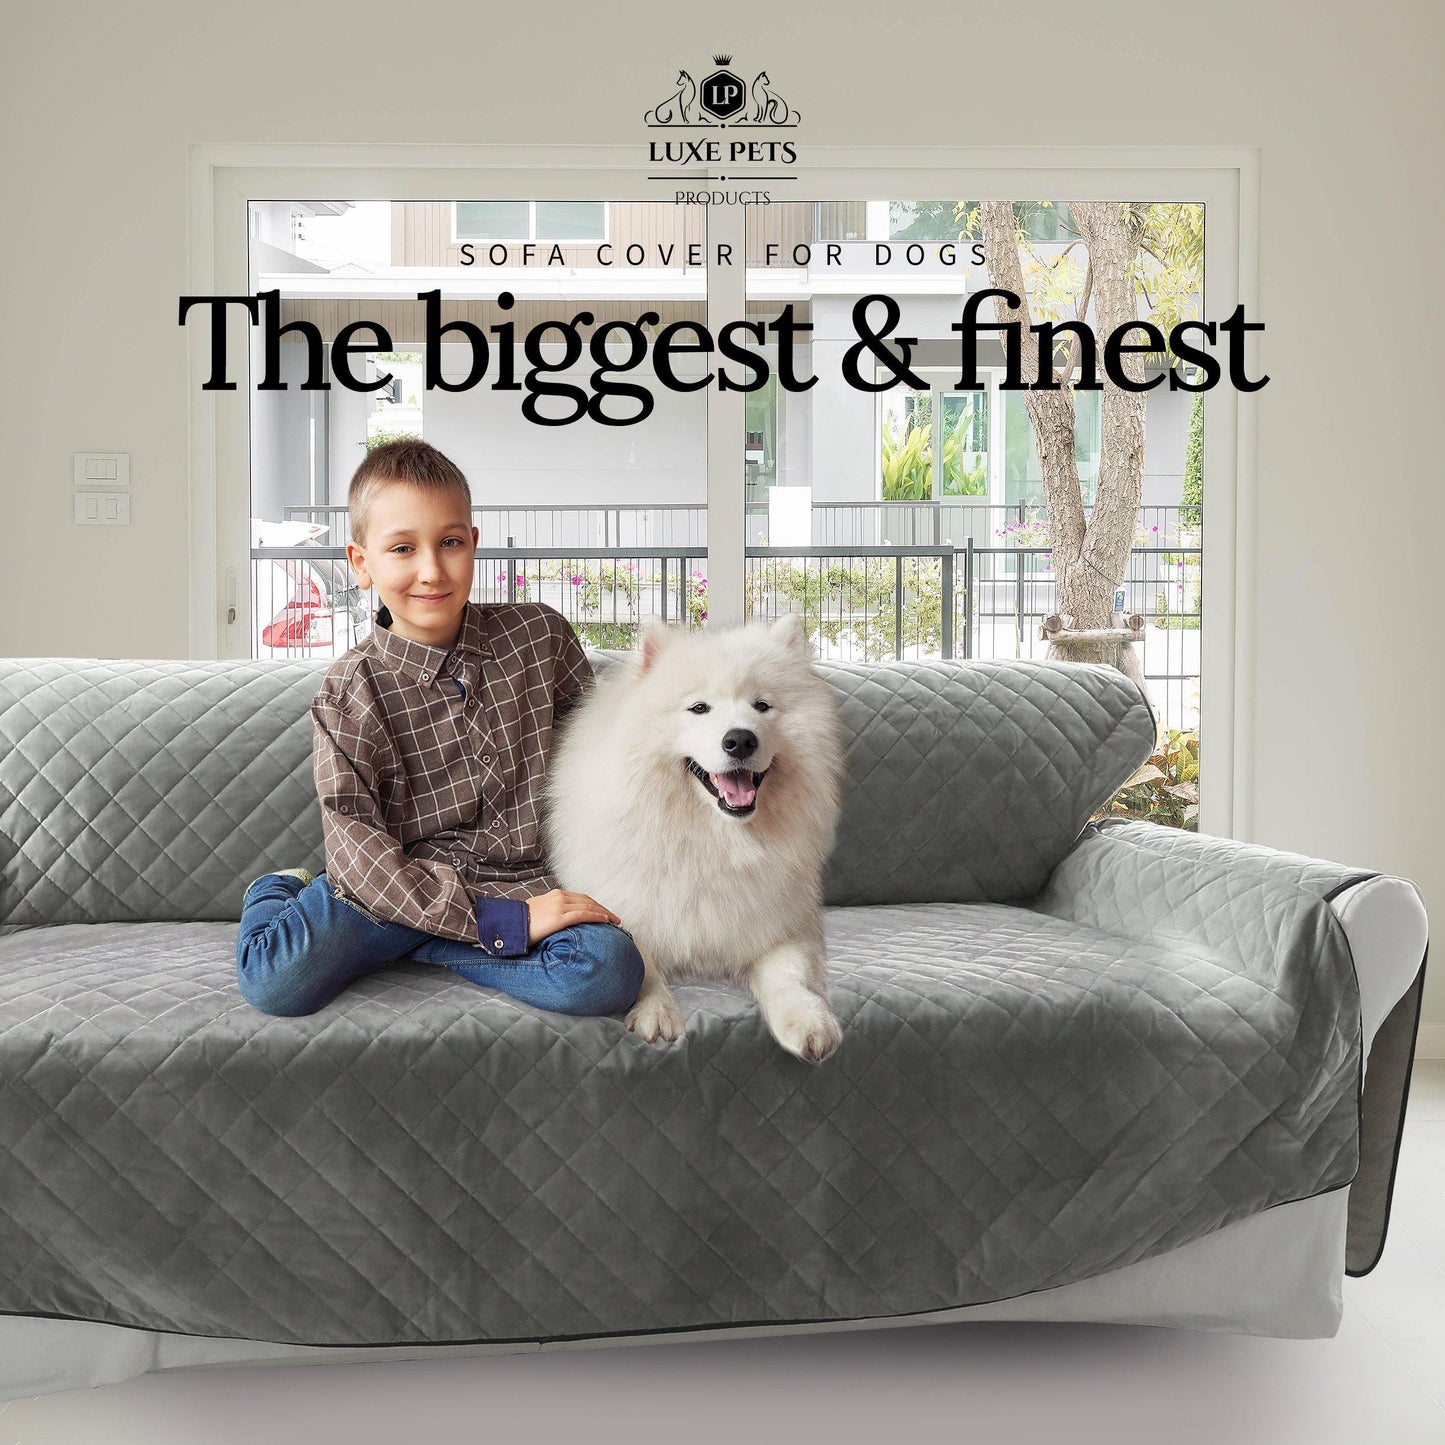 Luxury Dog Beds - Luxe Pets Products